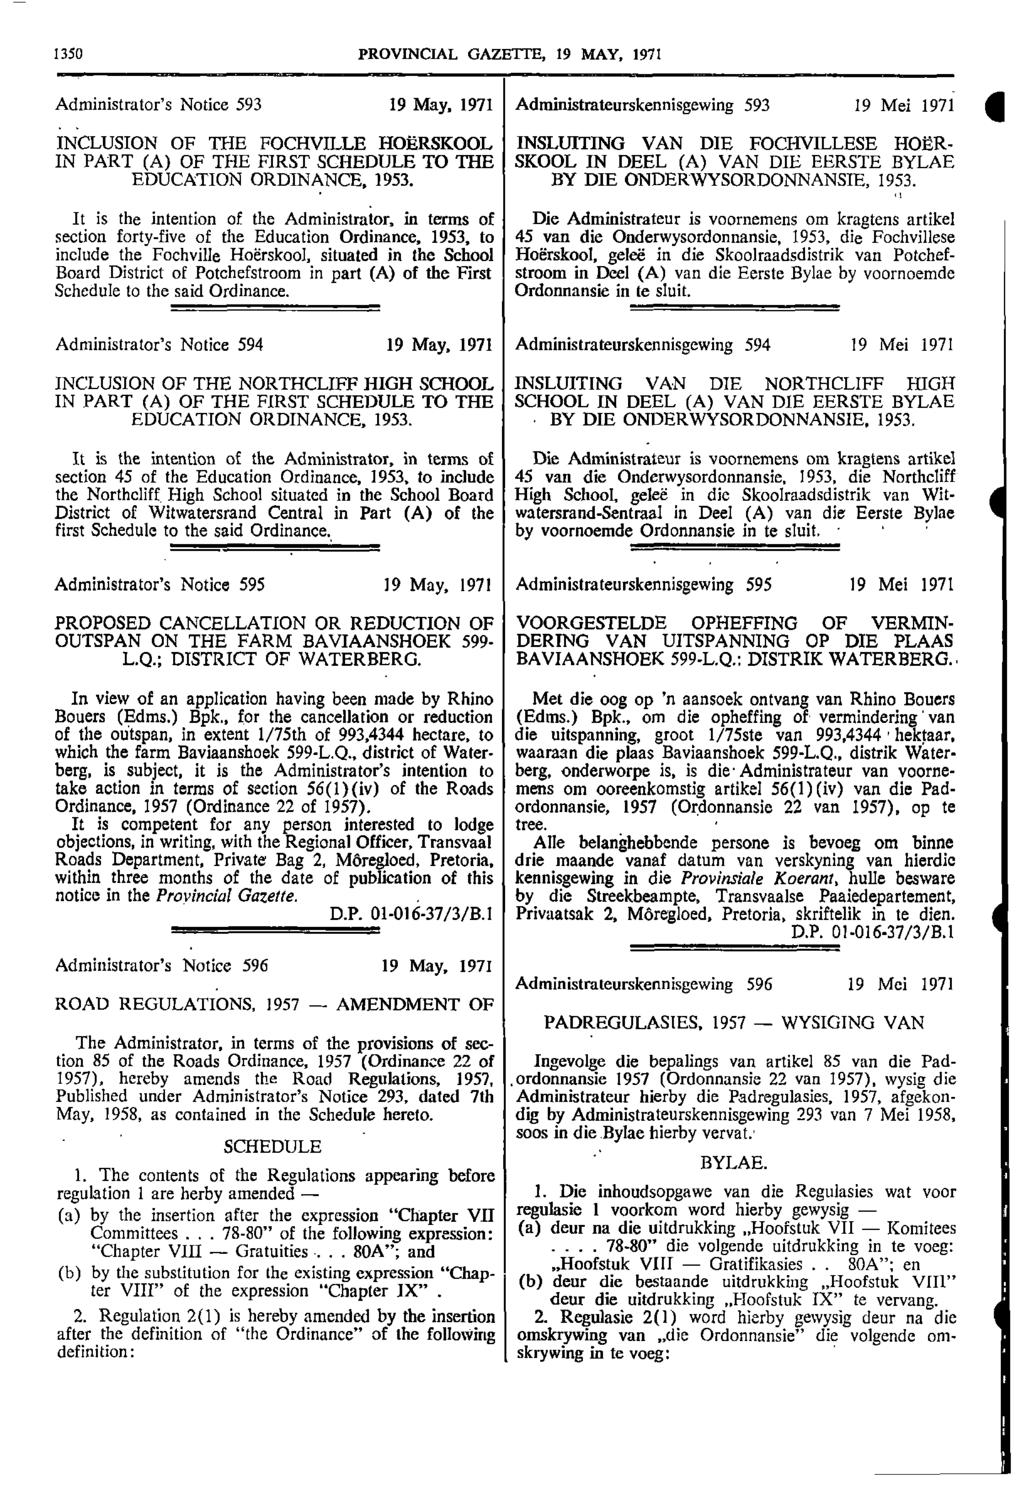 1350 PROVINCIAL GAZETTE 19 MAY 1971 Administrators Notice 593 19 May 1971 Administrateurskennisgewing 593 19 Mei 1971 a INCLUSION OF THE FOCHVILLE HOERSKOOL INSLUITING VAN DIE FOCHVILLESE HOER IN